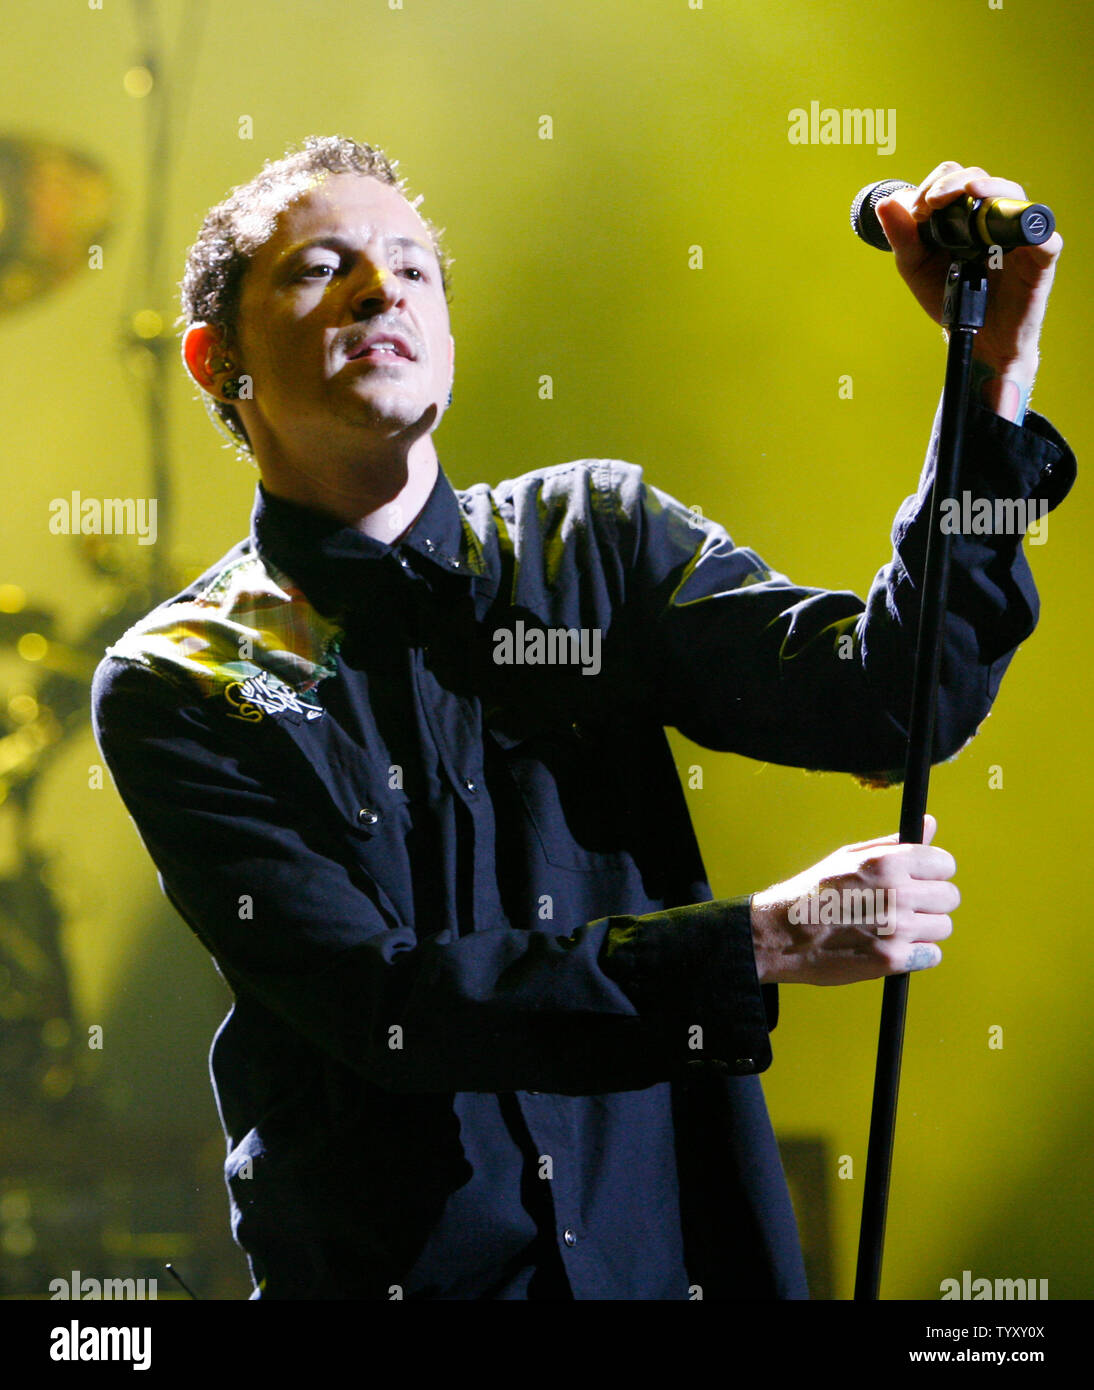 Singer Chester Bennington of the band Linkin Park performs in concert at Bercy in Paris on May 30, 2007.   (UPI Photo/David Silpa) Stock Photo